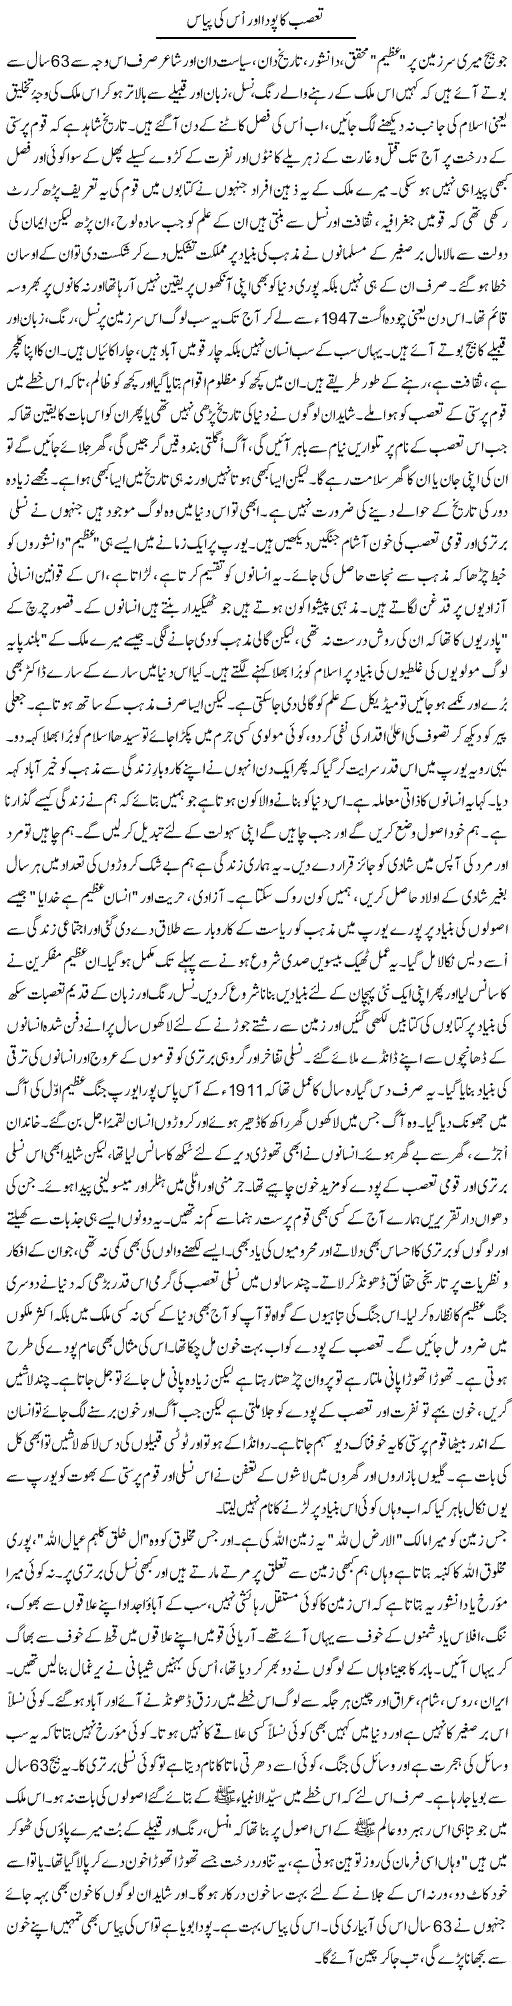 Divisions In Our Society Express Column Orya Maqbool 16 July 2011